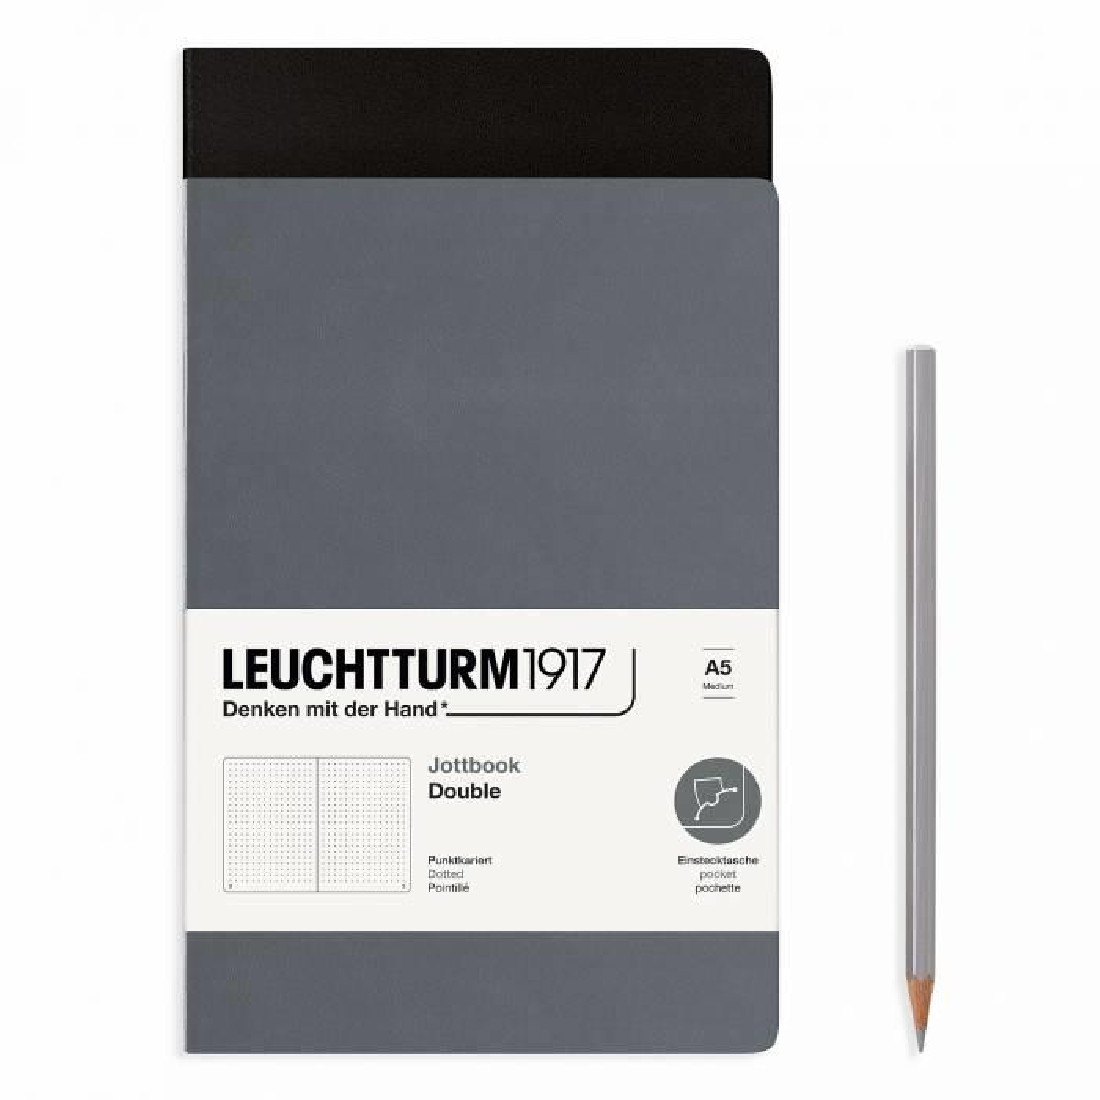 Leuchtturm 1917 Jottbook Double A5 Anthracite and Black Dotted